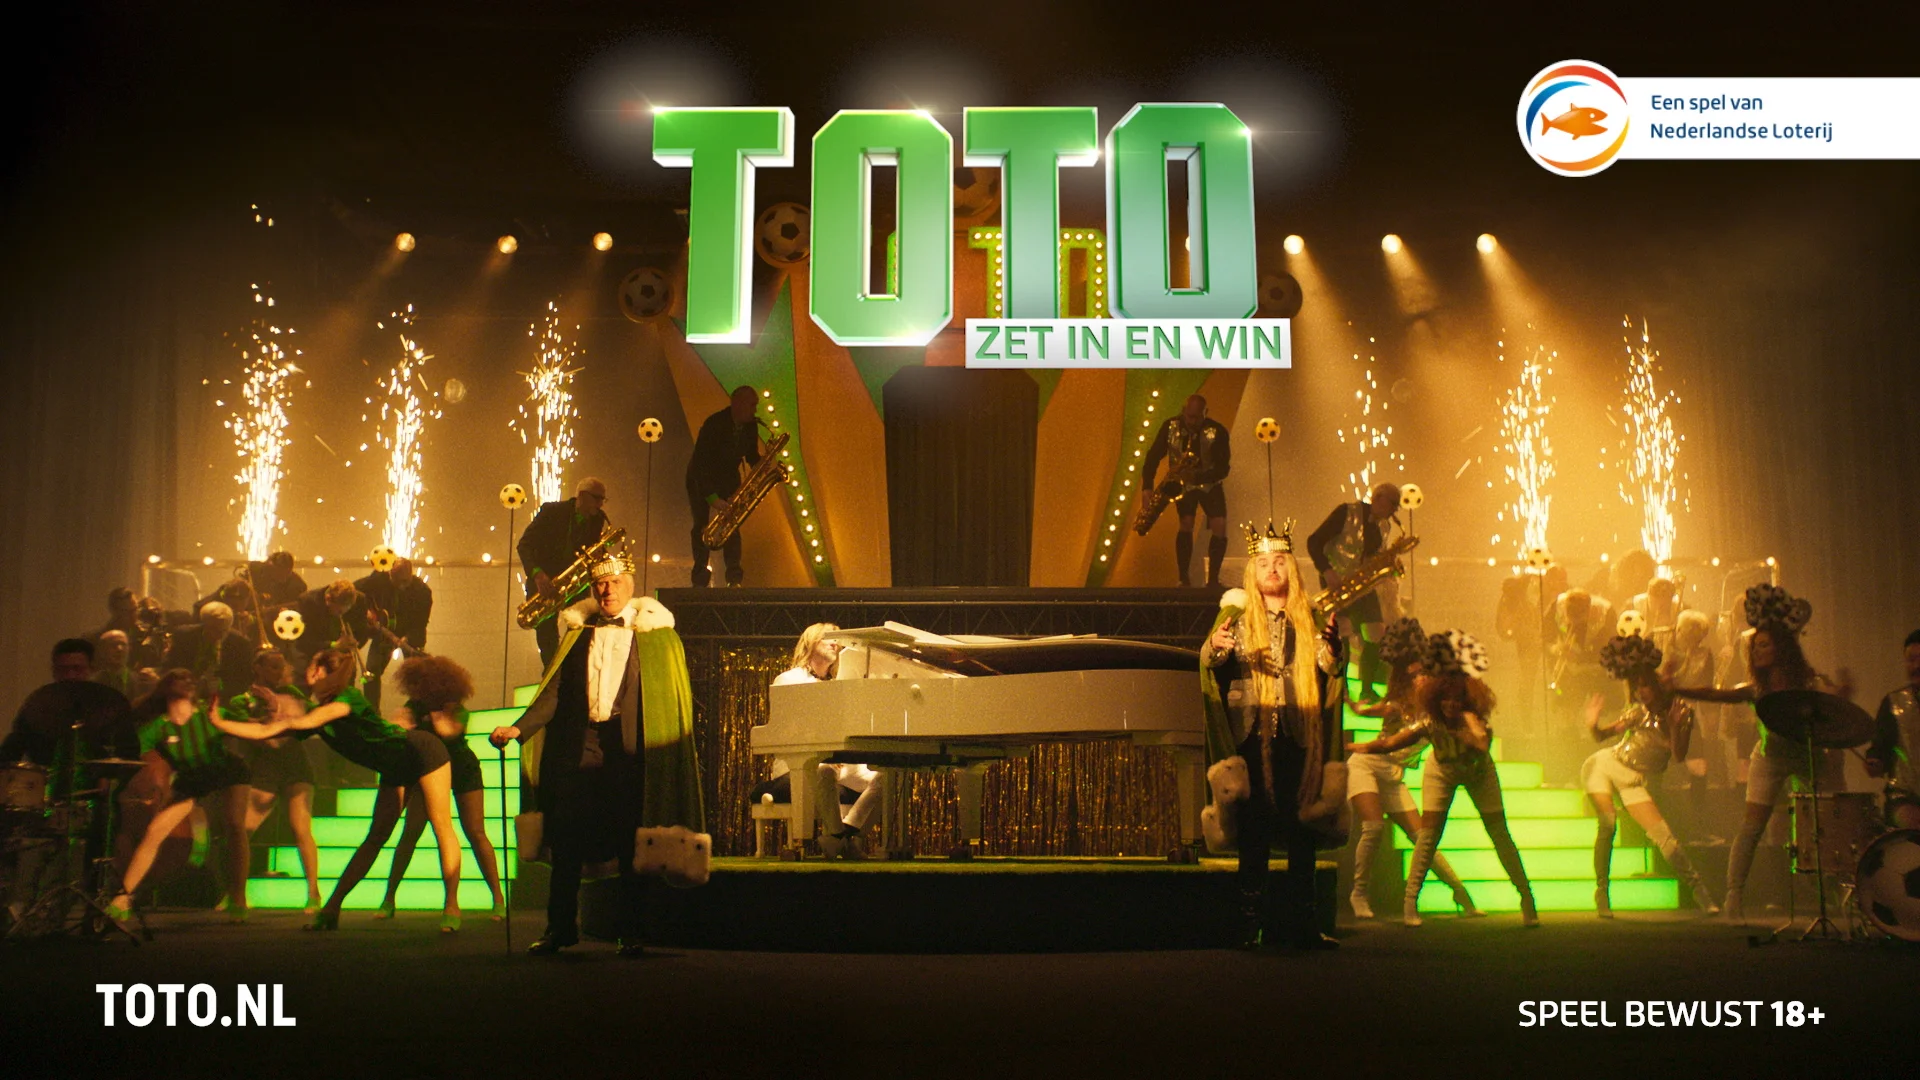 TOTO KNVB Beker - The Knock-Outs on Vimeo